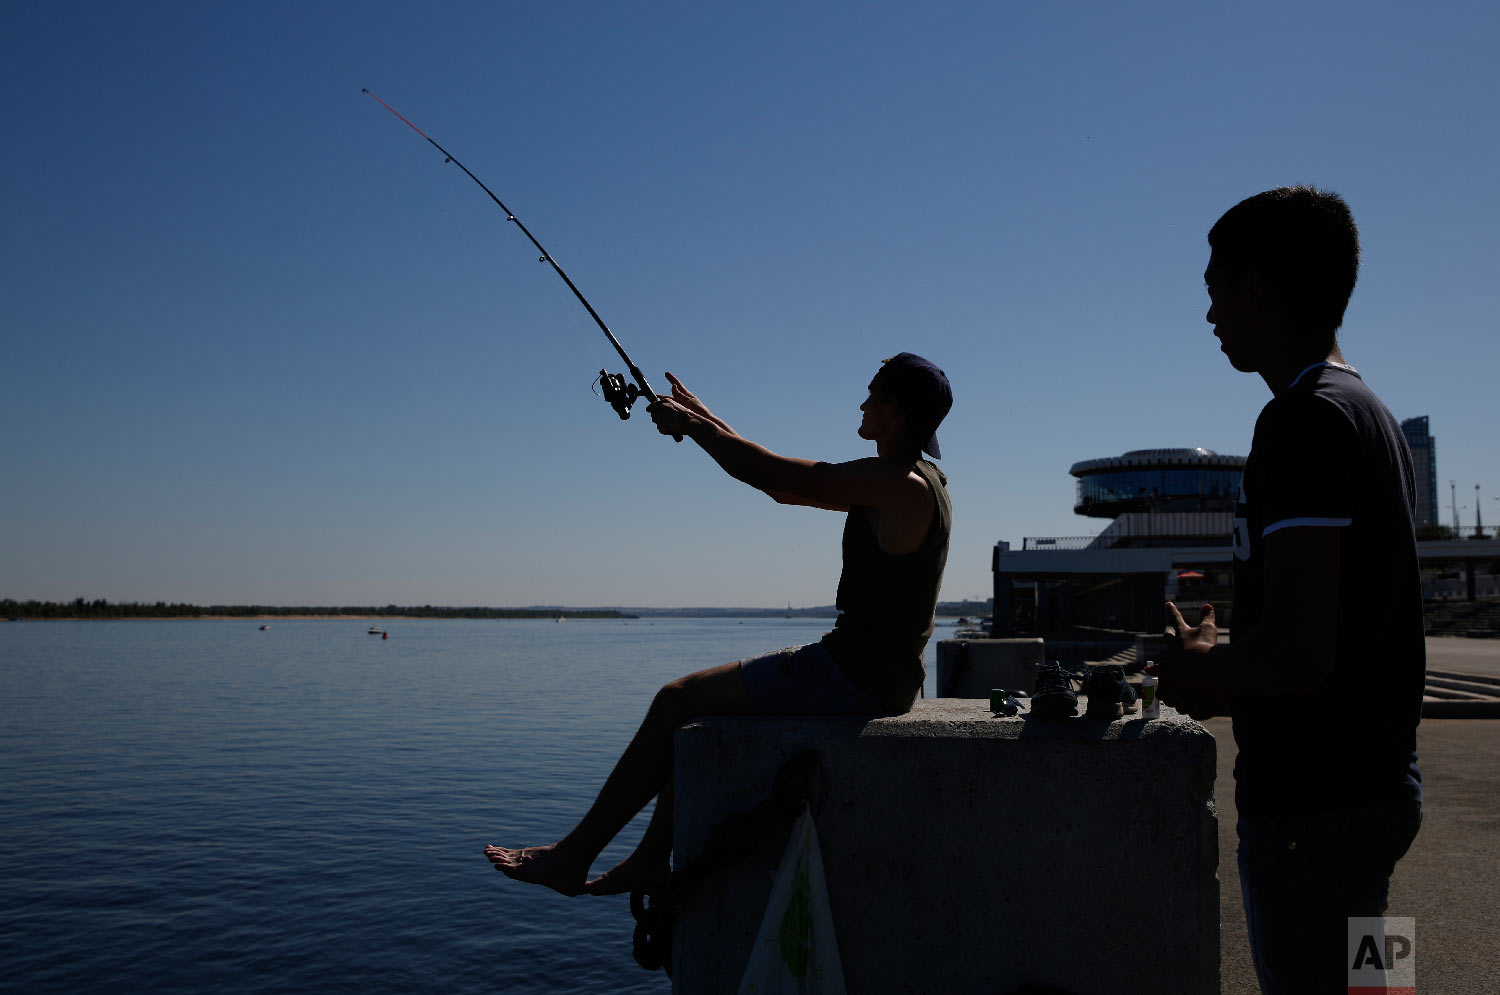  Young men fish along the banks of the Volga River during the 2018 soccer World Cup in Volgograd, Russia on June 18, 2018. (AP Photo/Rebecca Blackwell) 